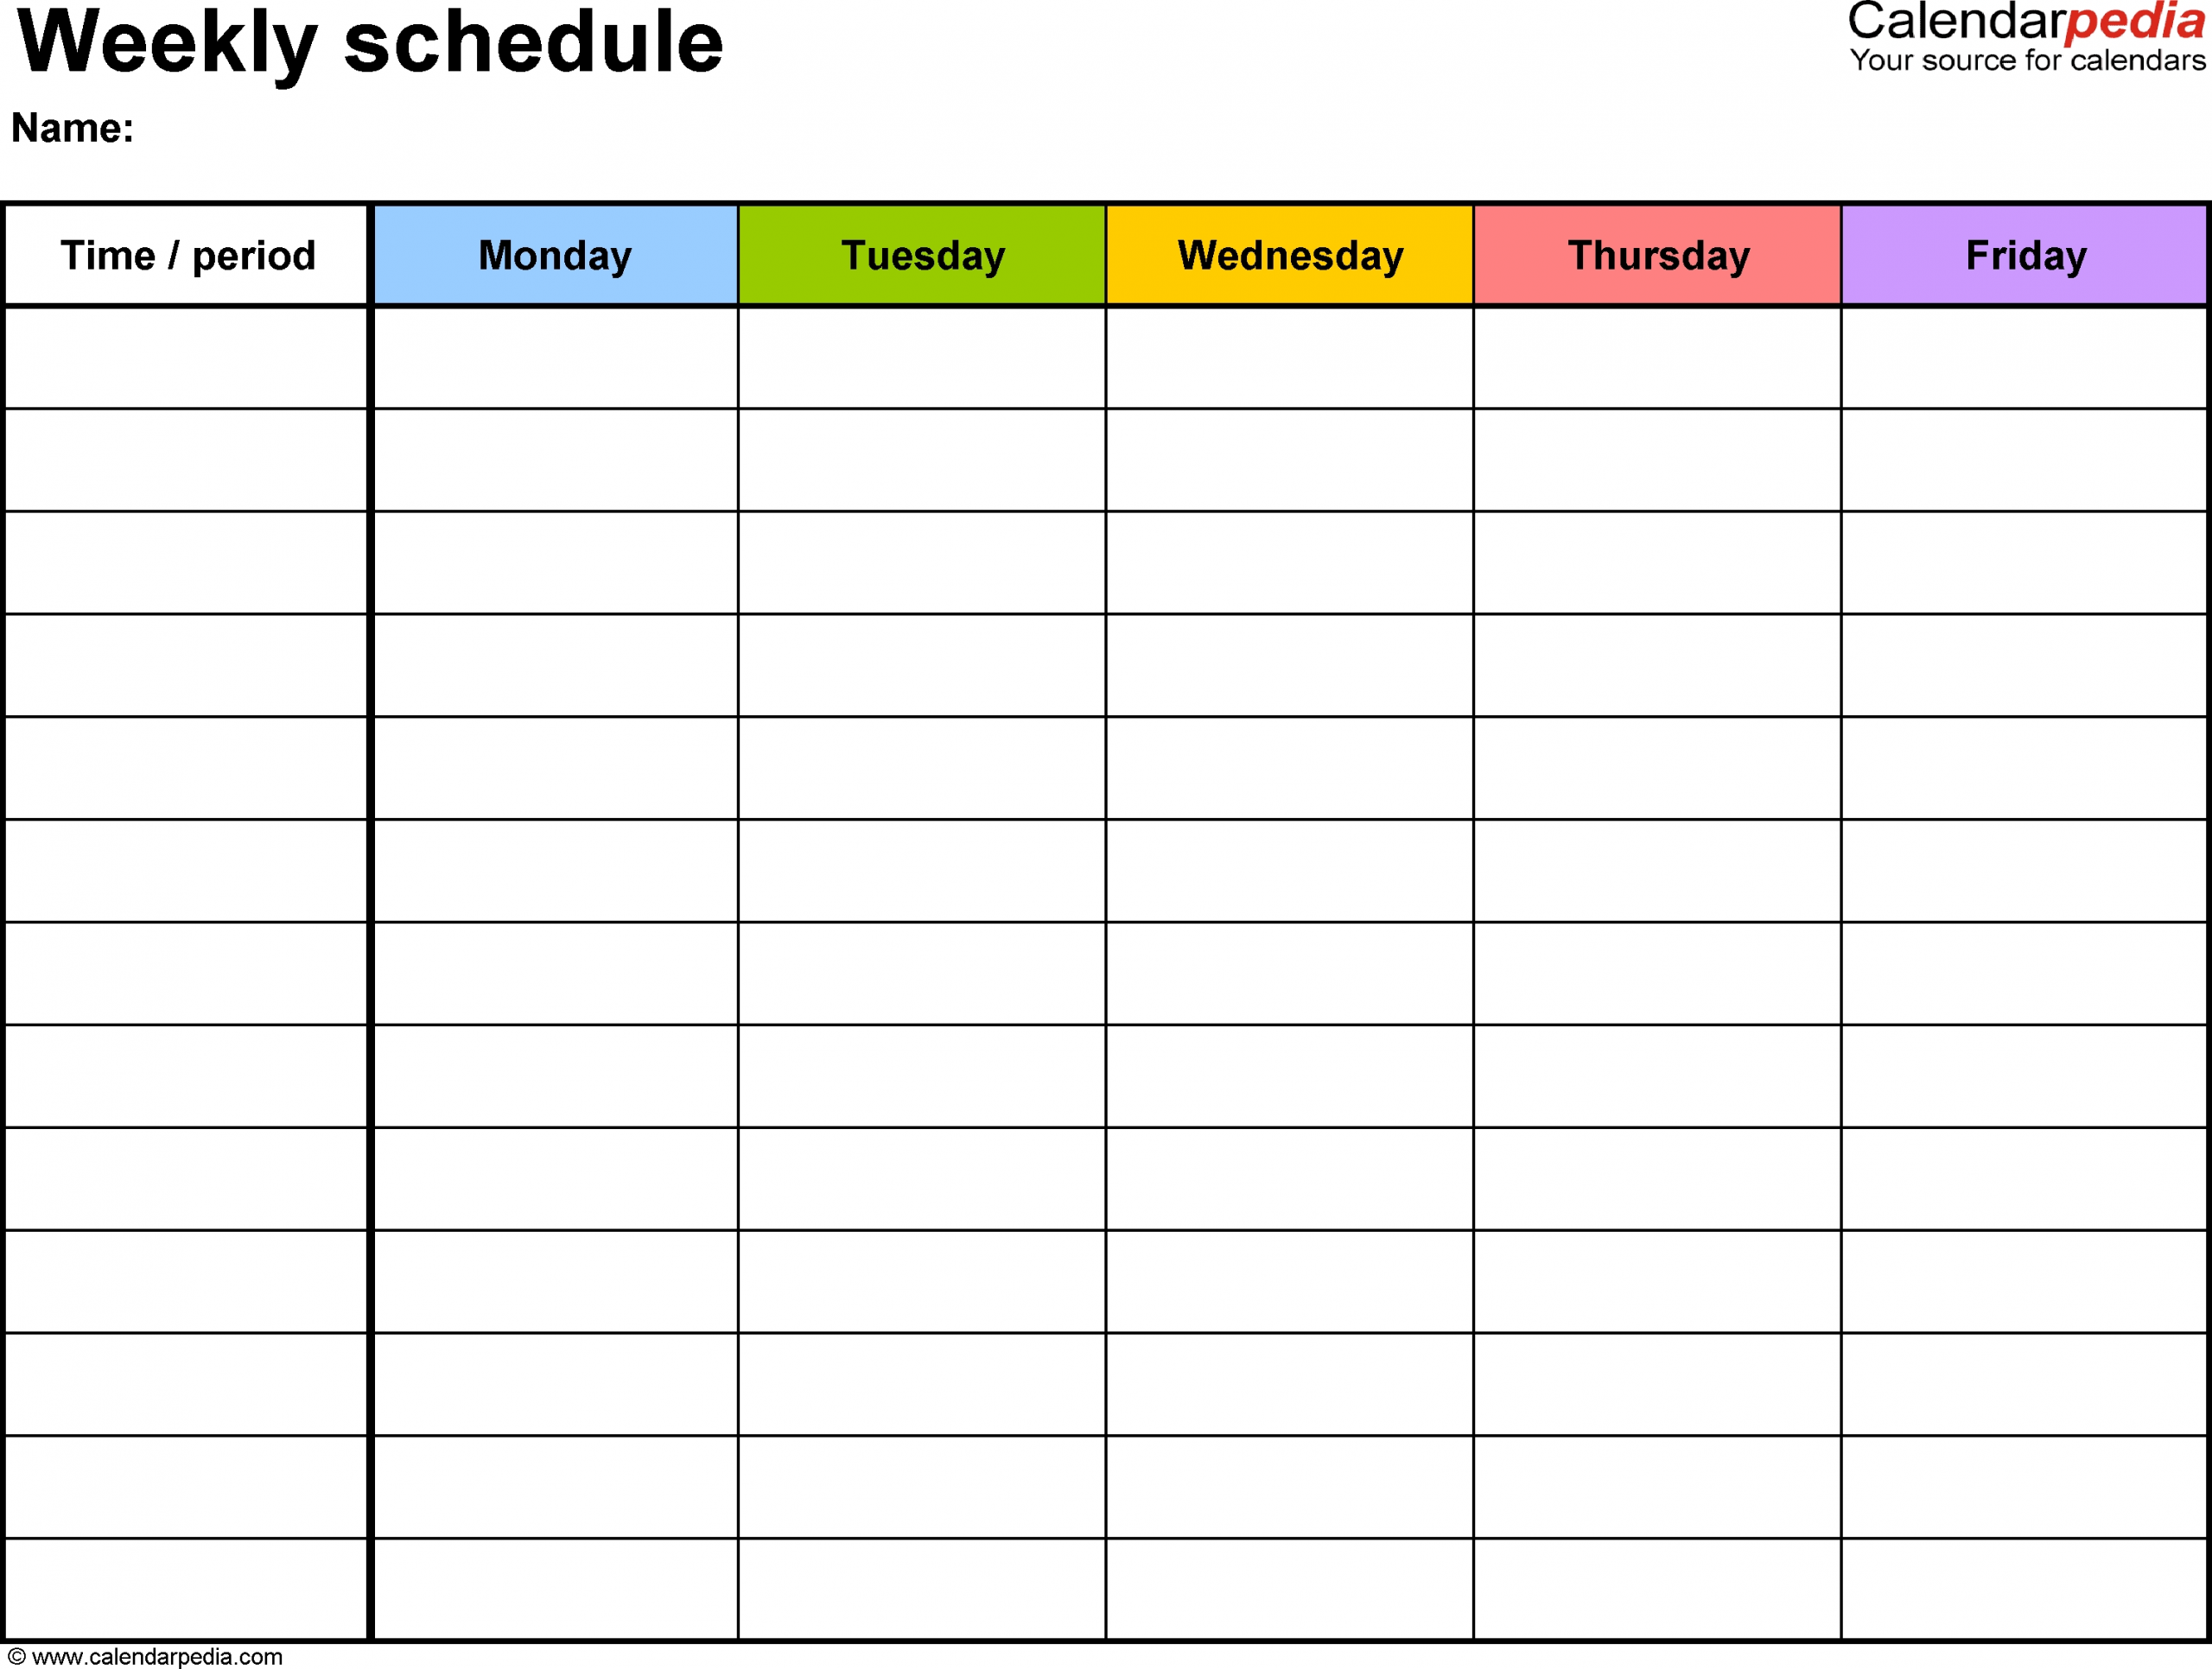 Weekly Schedule Template For Word Version 1: Landscape, 1